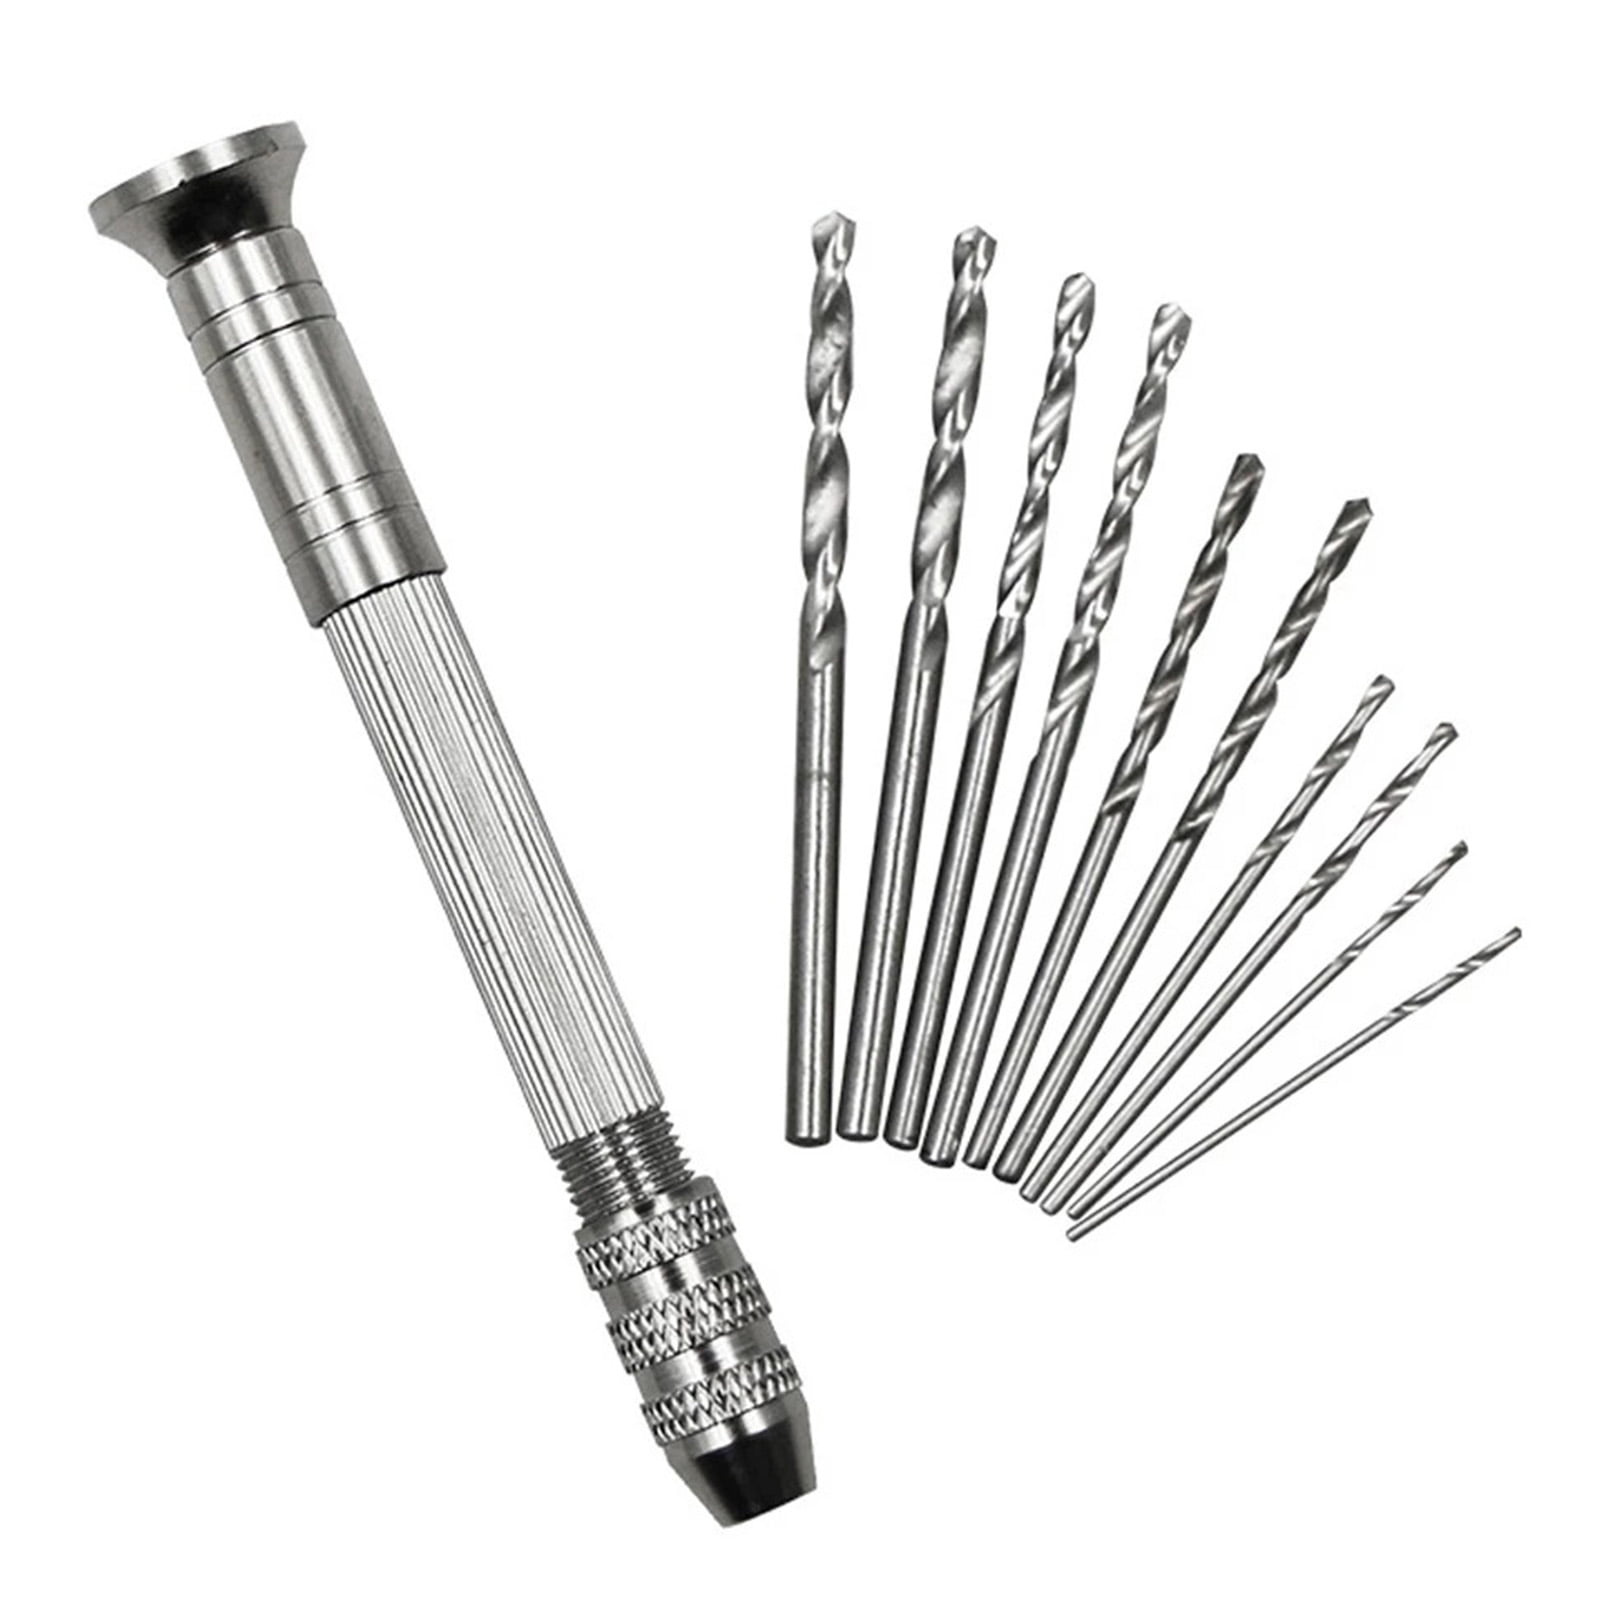 Drill Bit Set,25Pcs Aluminum Alloy Manual Drilling and reaming Drill bit,Replacement Drill Accessories,for Hand Twisted Drill Model Making Wood 